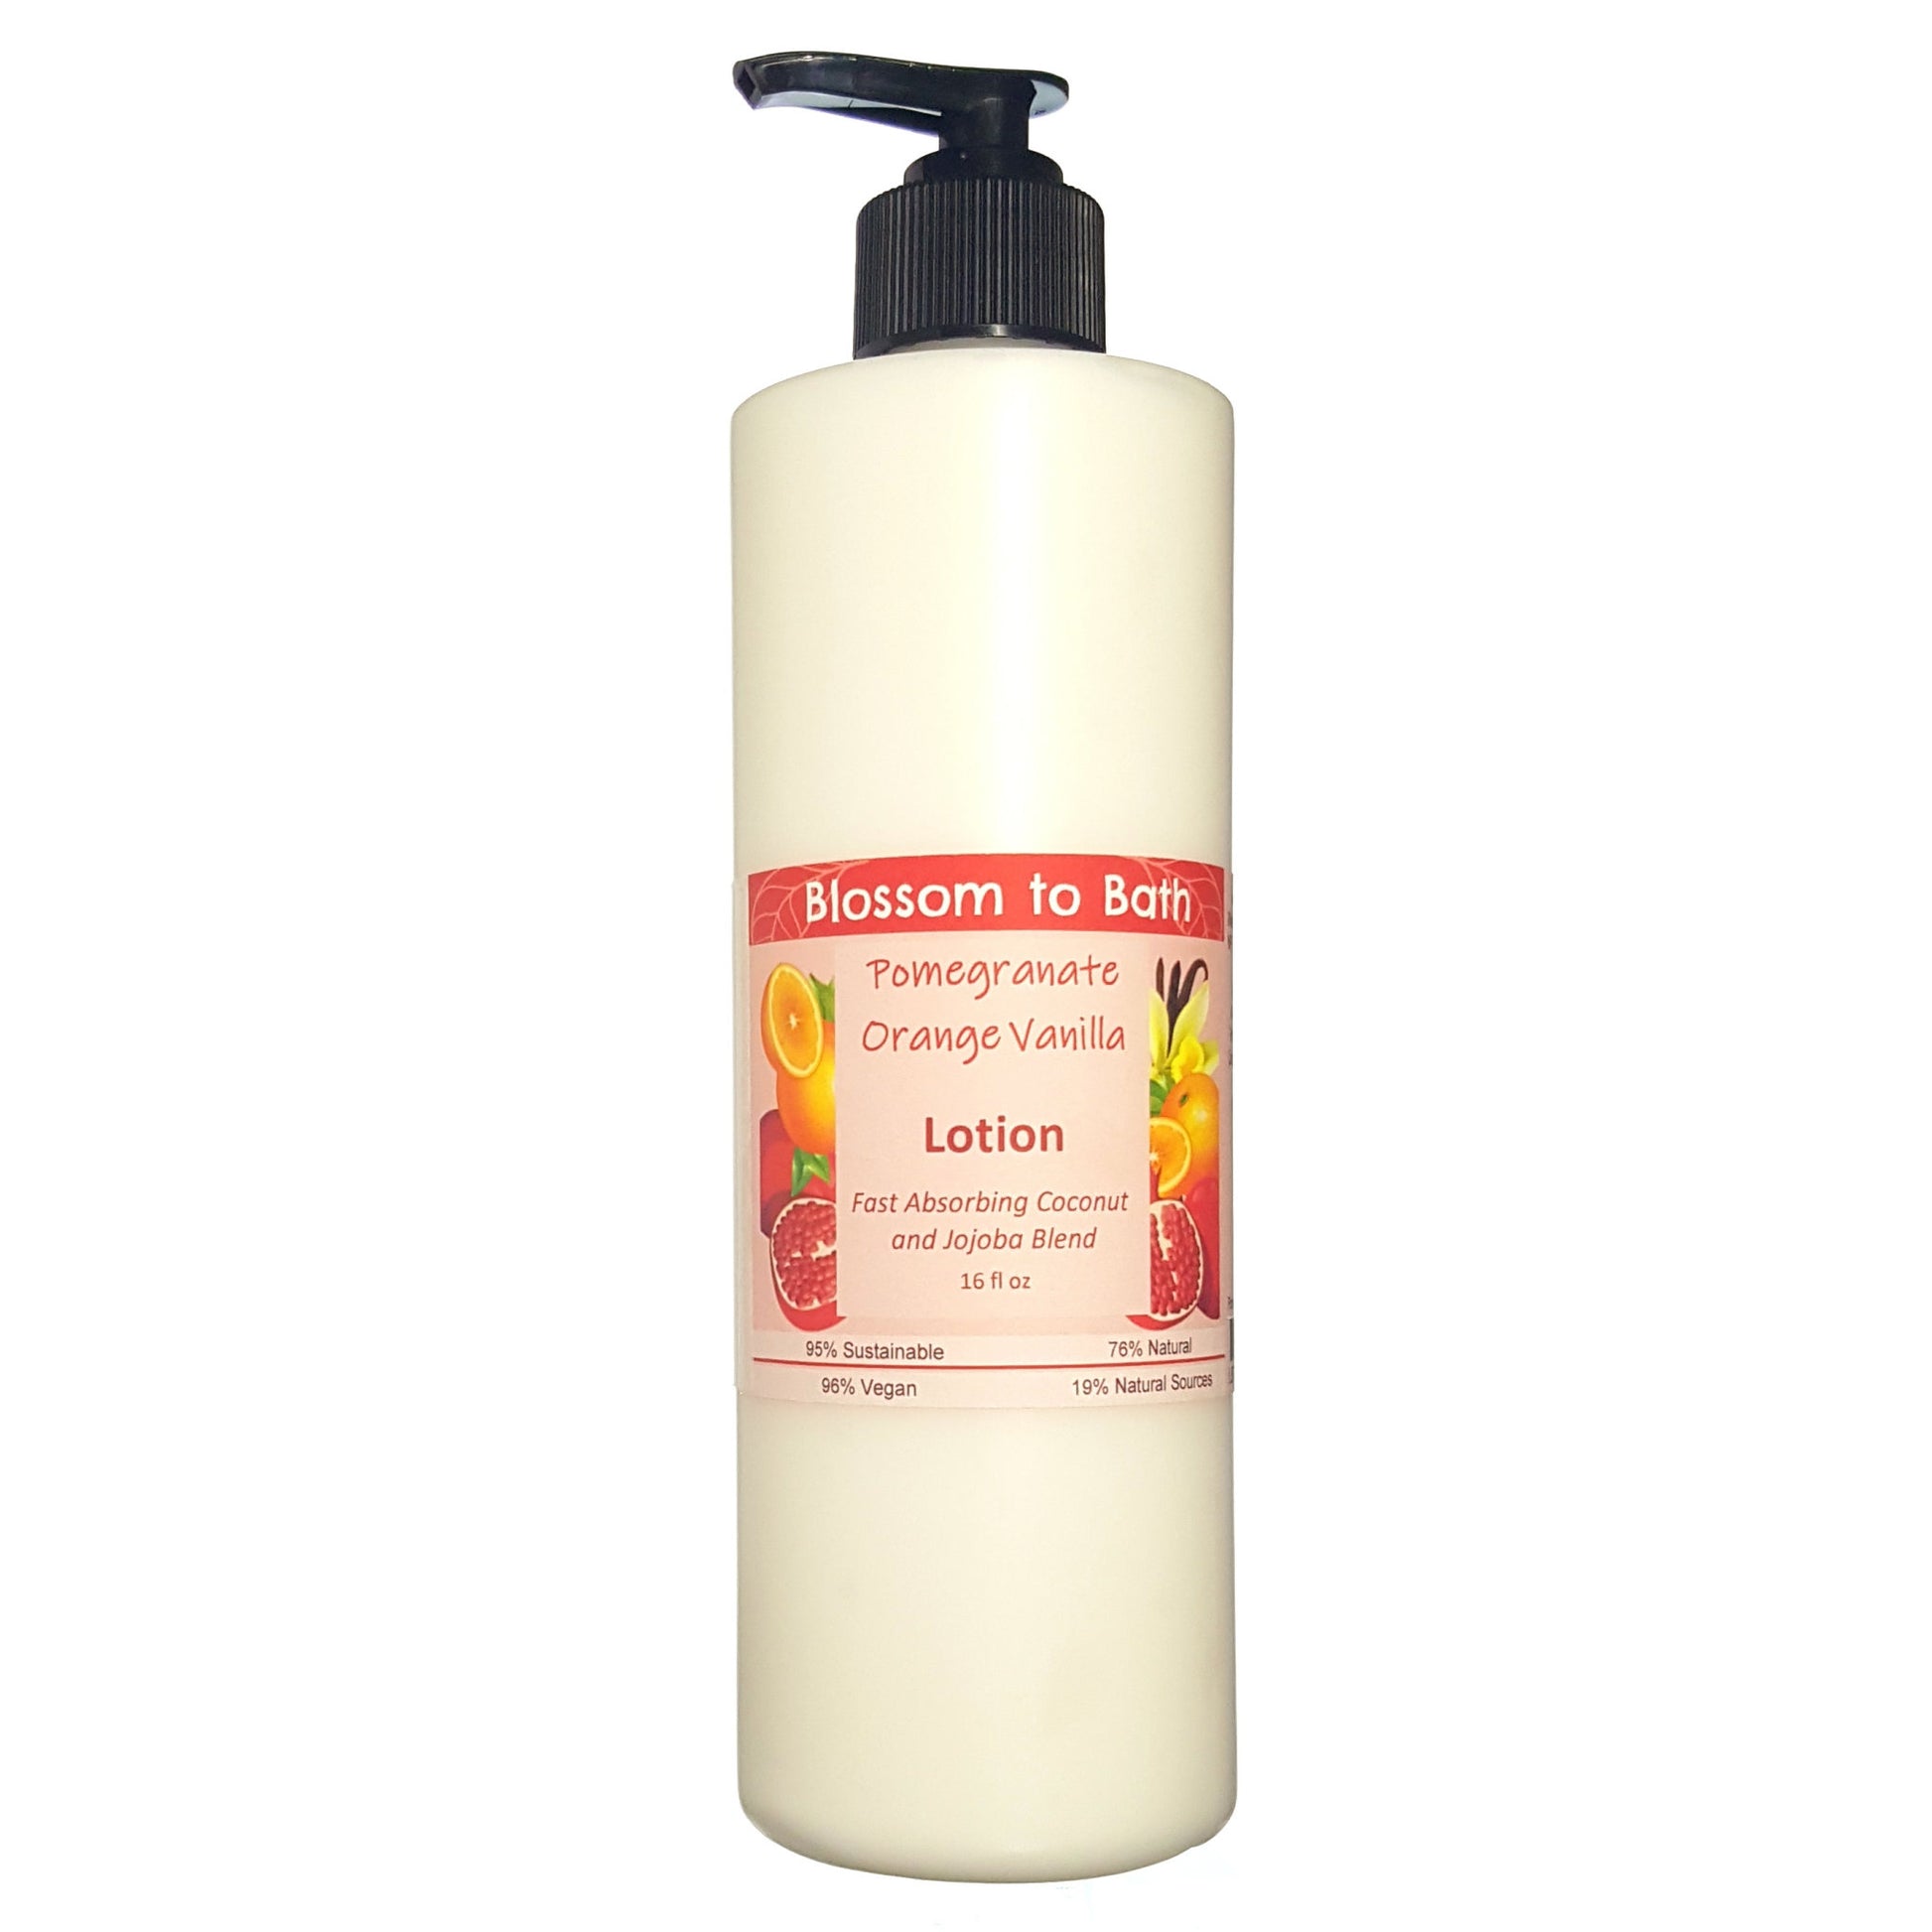 Buy Blossom to Bath Pomegranate Orange Vanilla Lotion from Flowersong Soap Studio.  Daily moisture luxury that soaks in quickly made with organic oils and butters that soften and smooth the skin